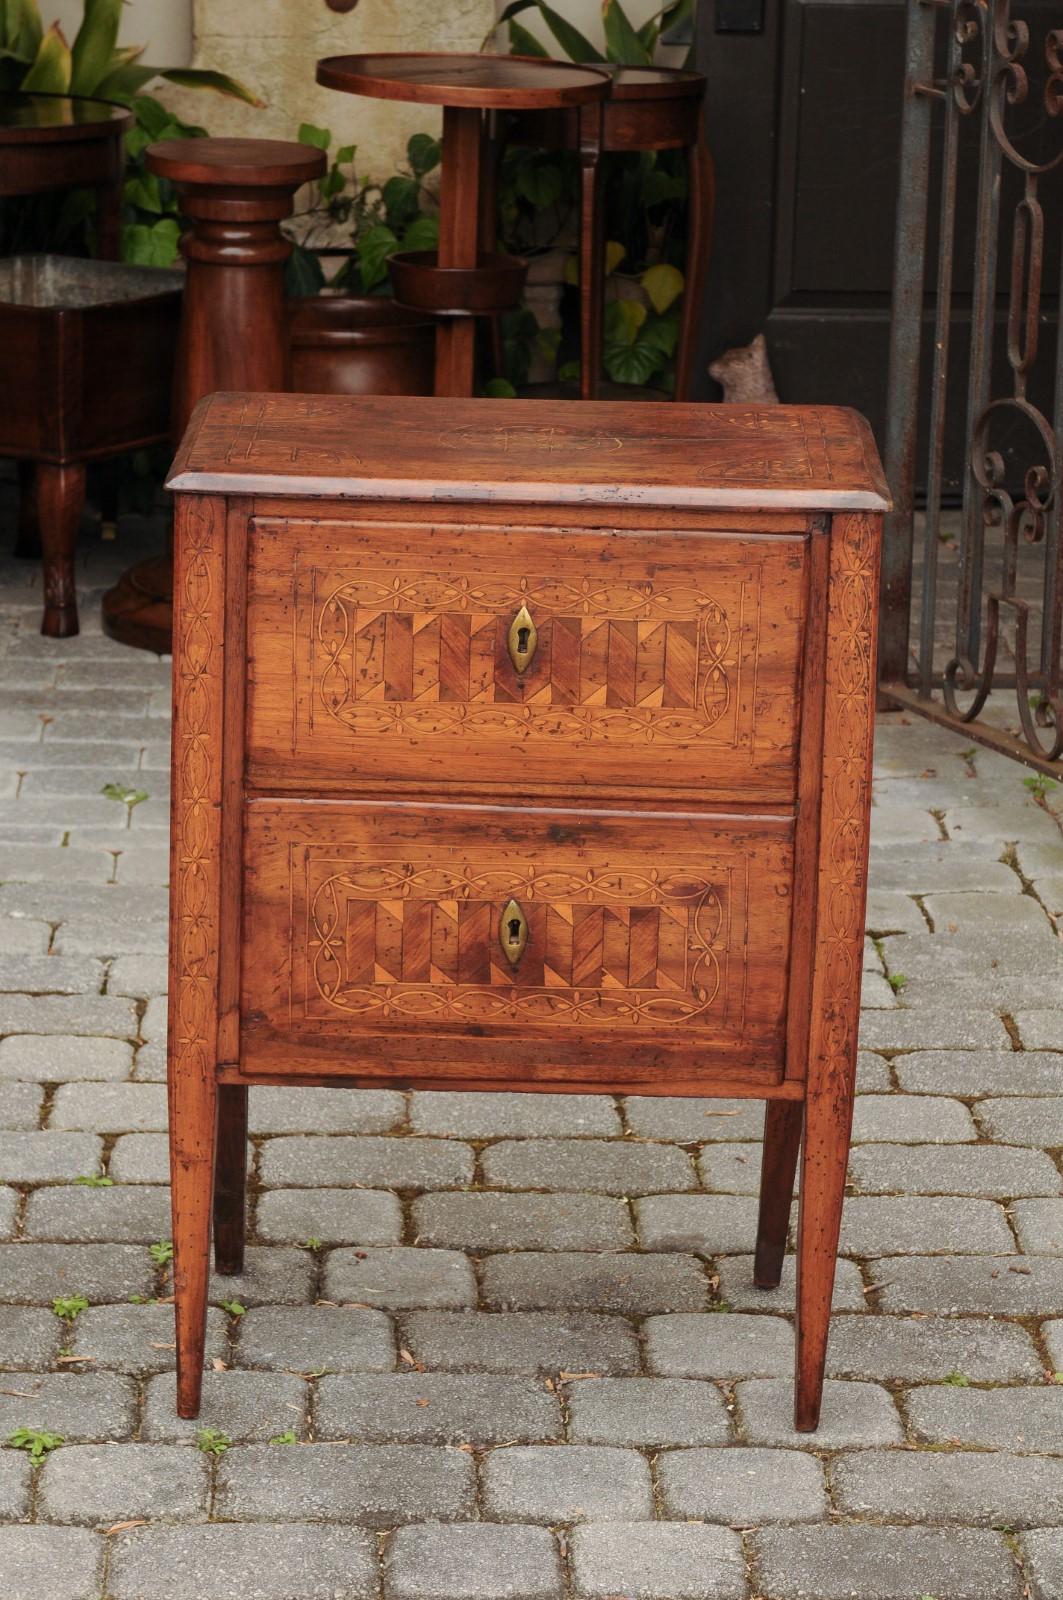 A petite Italian neoclassical walnut commode from the early 19th century, with geometrical and floral inlaid motifs. Born in Italy during the early years of the 19th century, this small neoclassical commode features a rectangular top with beveled